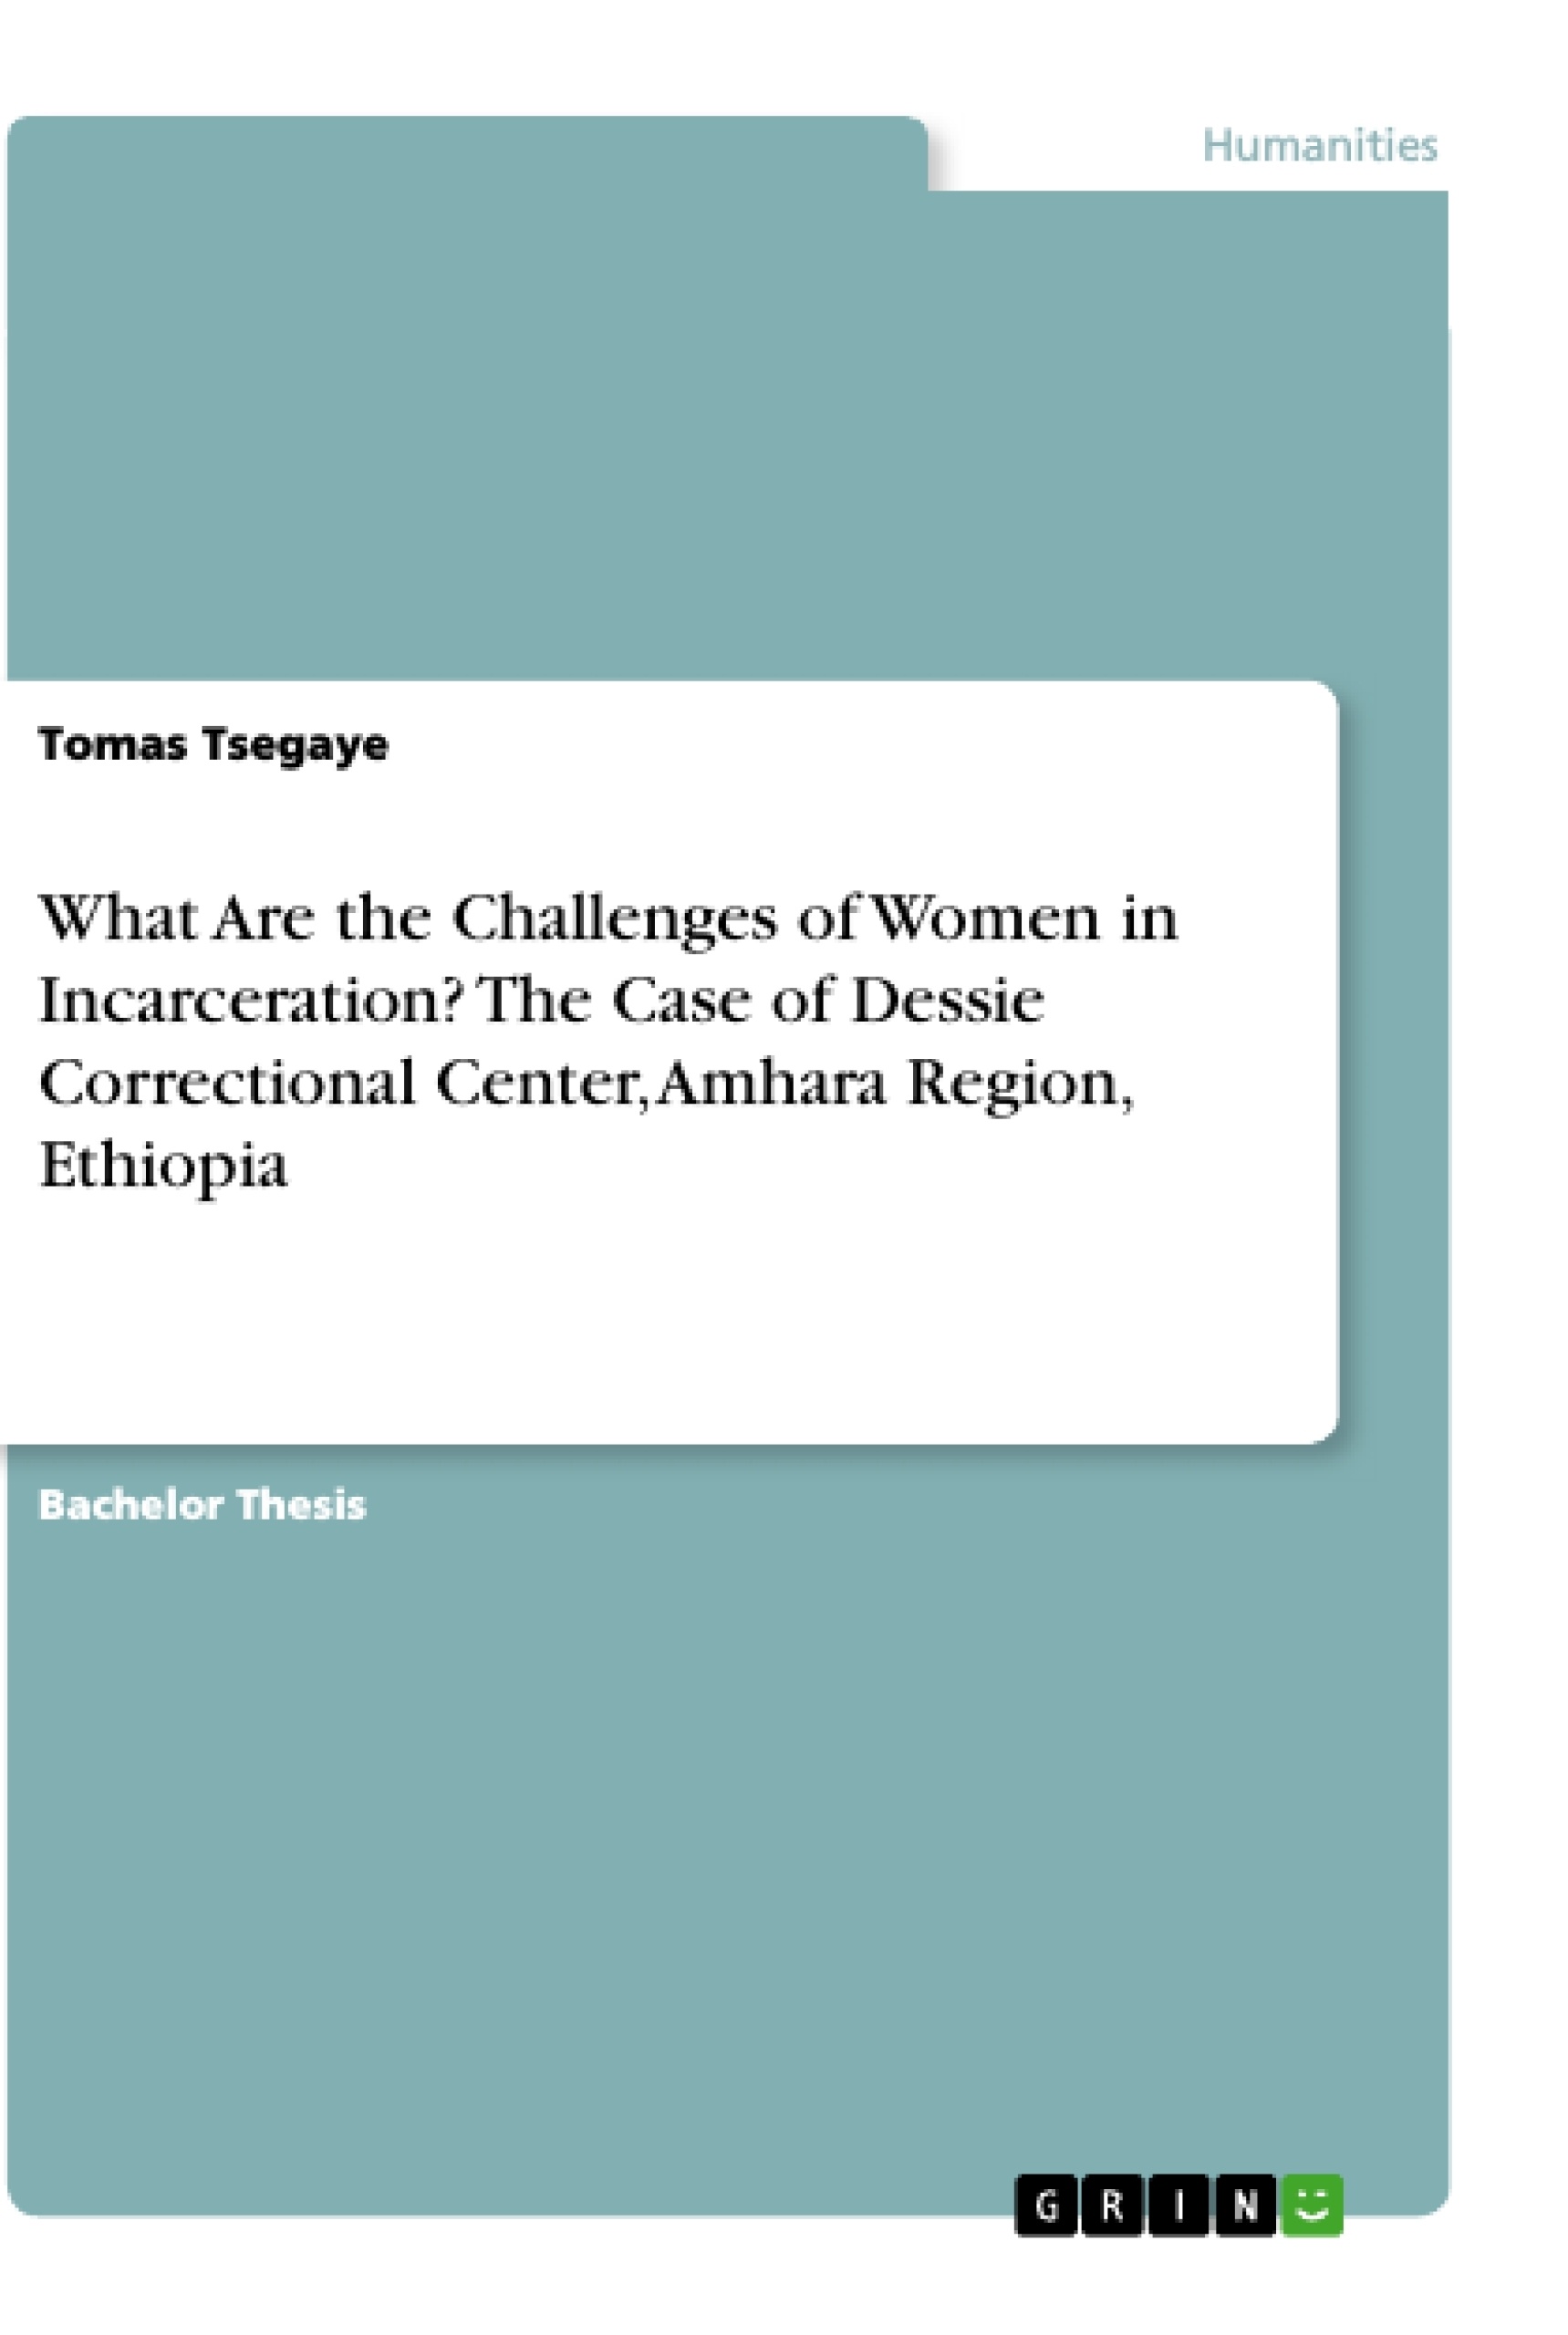 Título: What Are the Challenges of Women in Incarceration? The Case of Dessie Correctional Center, Amhara Region, Ethiopia